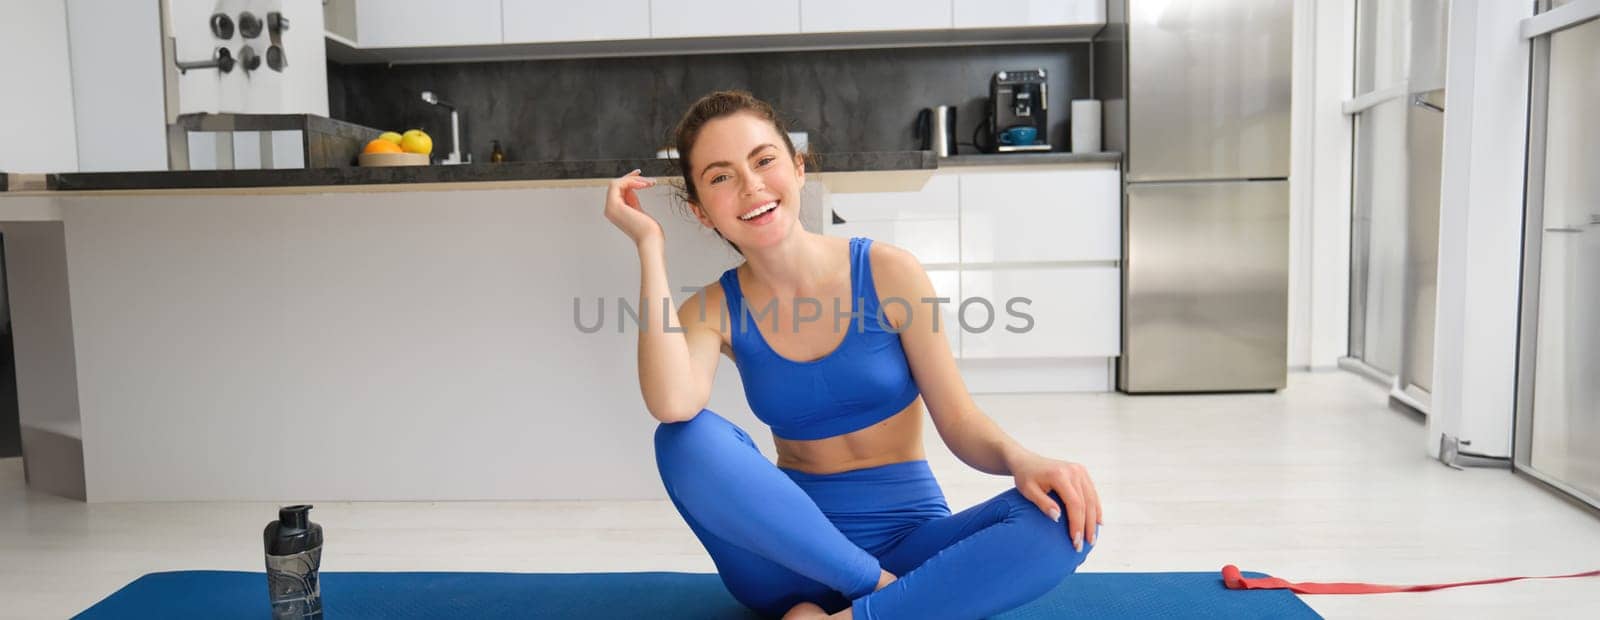 Image of young sport woman sitting at home on yoga mat, doing workout, stretching fitness exercises on floor in living room, smiling and looking happy at camera.